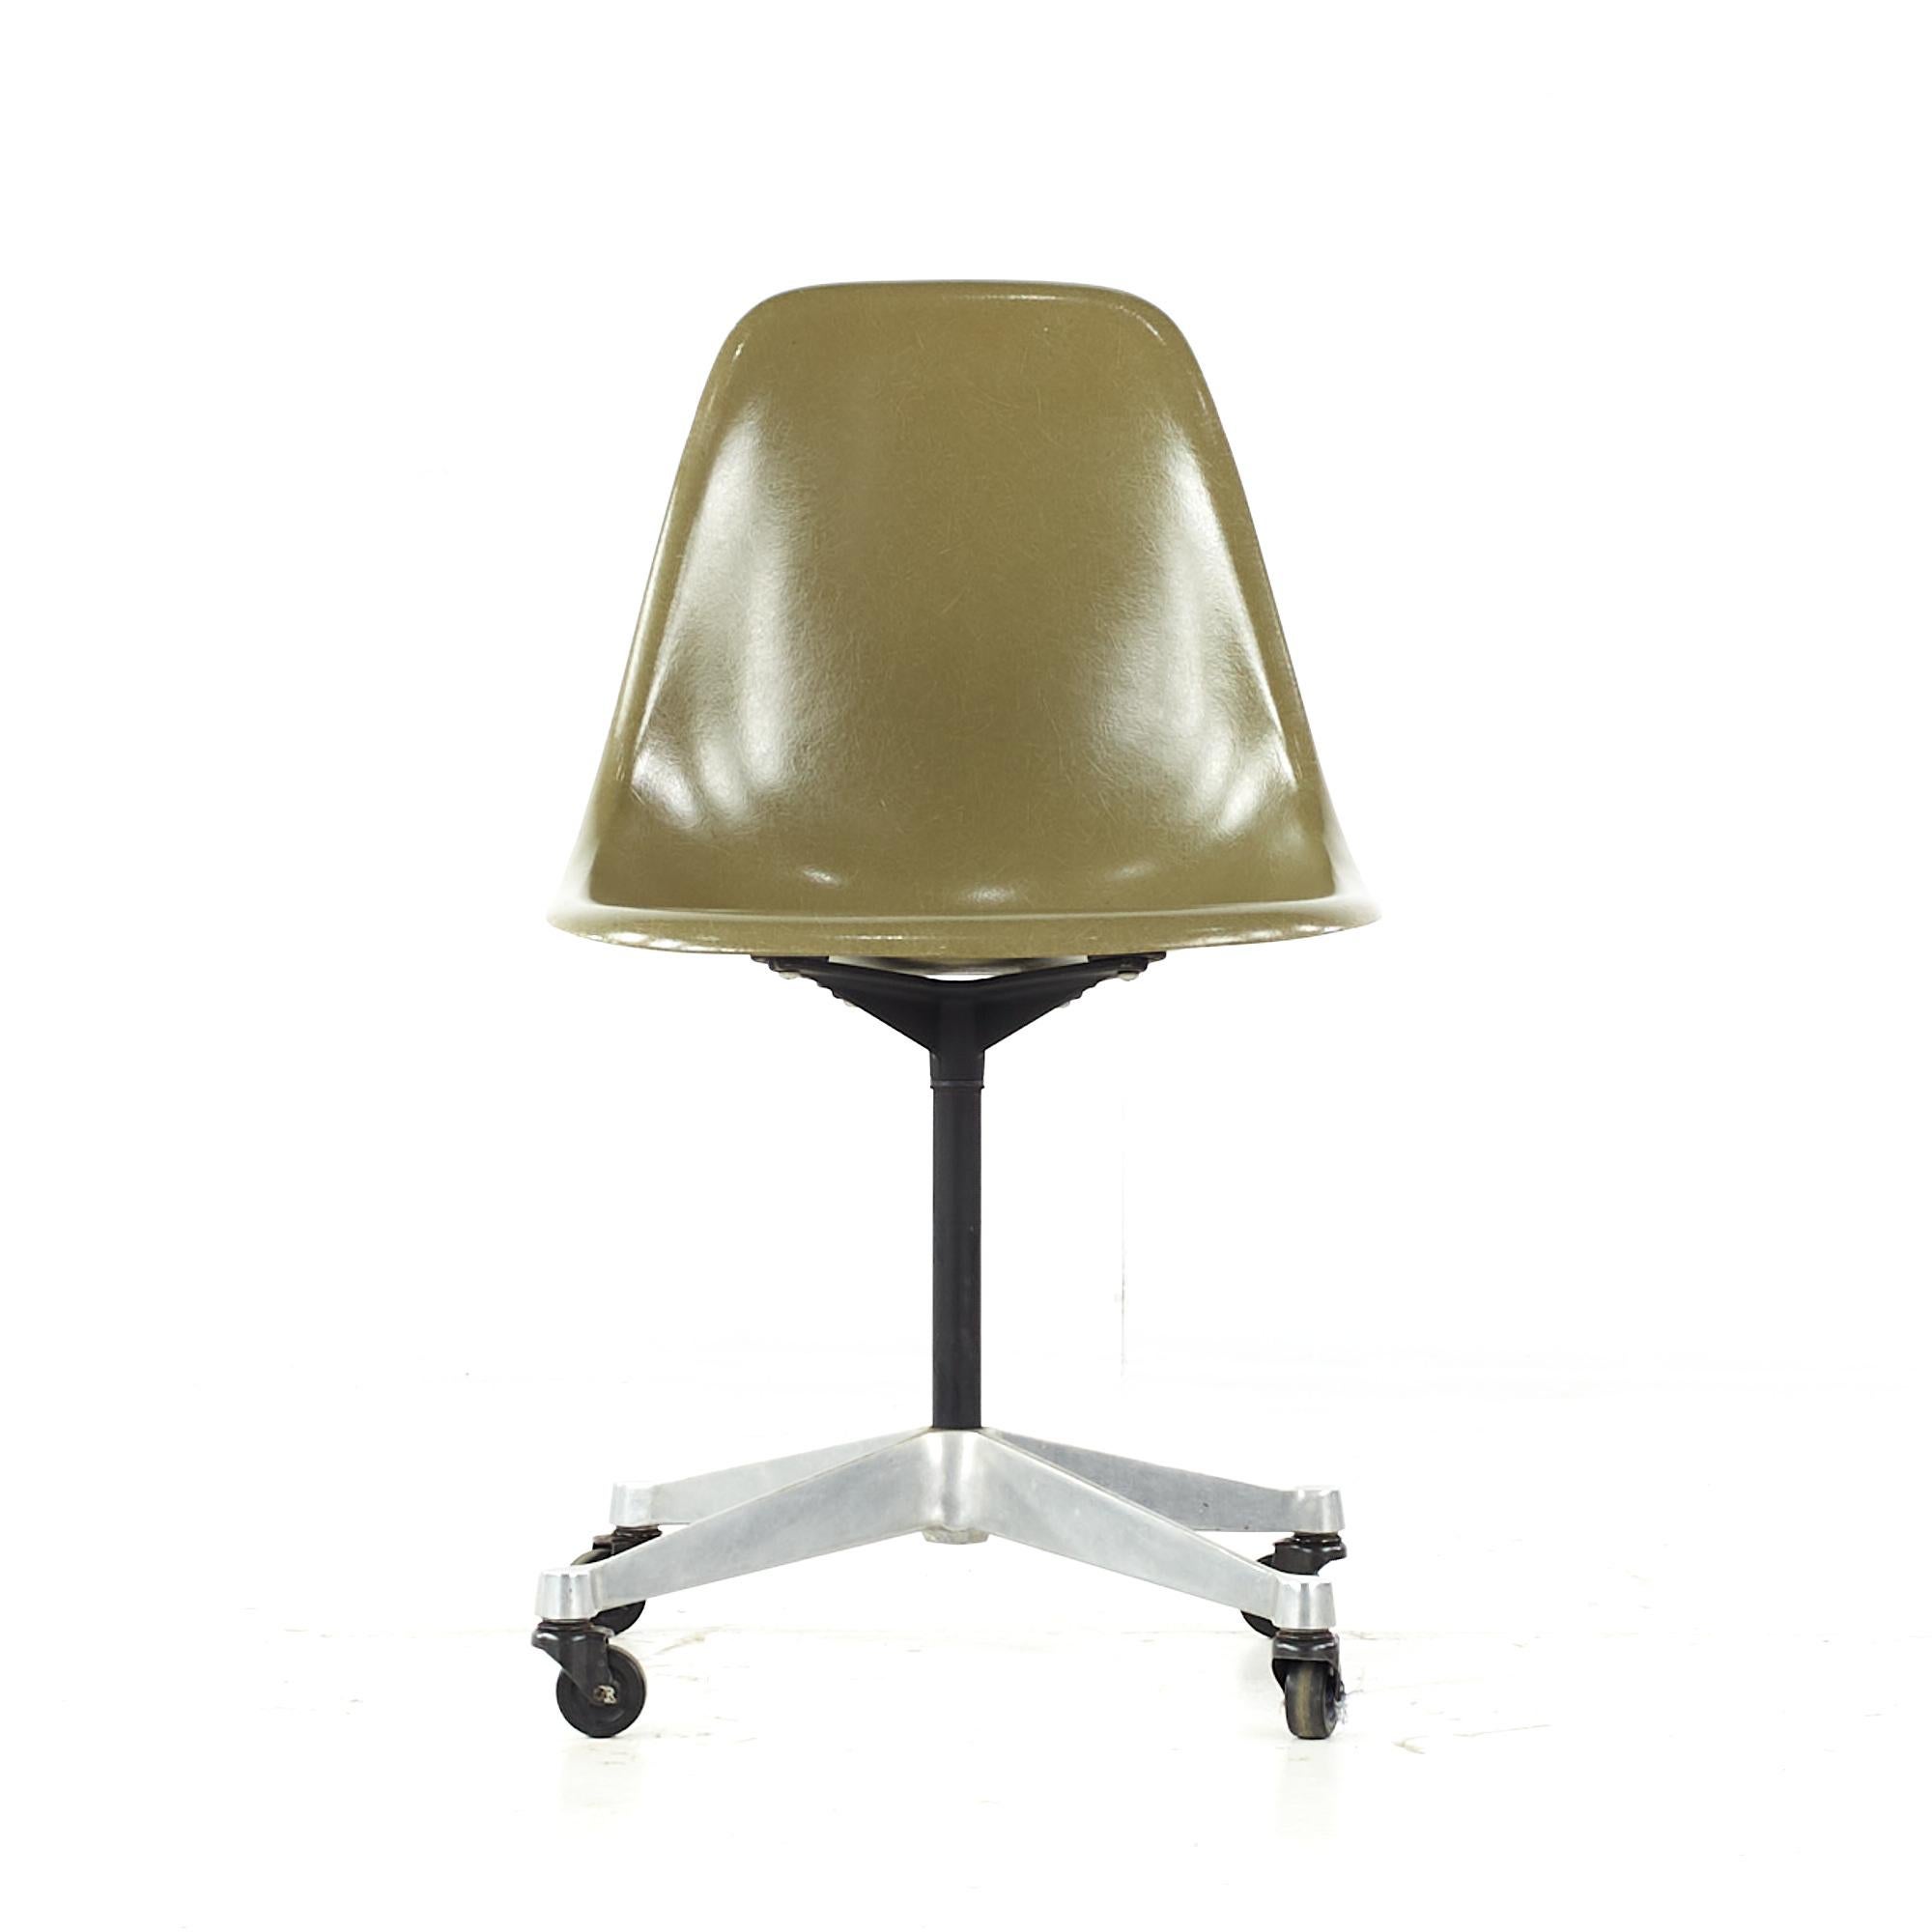 Charles and Ray Eames for Herman Miller Mid Century Wheeled Shell Chair

This chair measures: 18.5 wide x 24 deep x 32 high, with a seat height of 17.5 inches

All pieces of furniture can be had in what we call restored vintage condition. That means